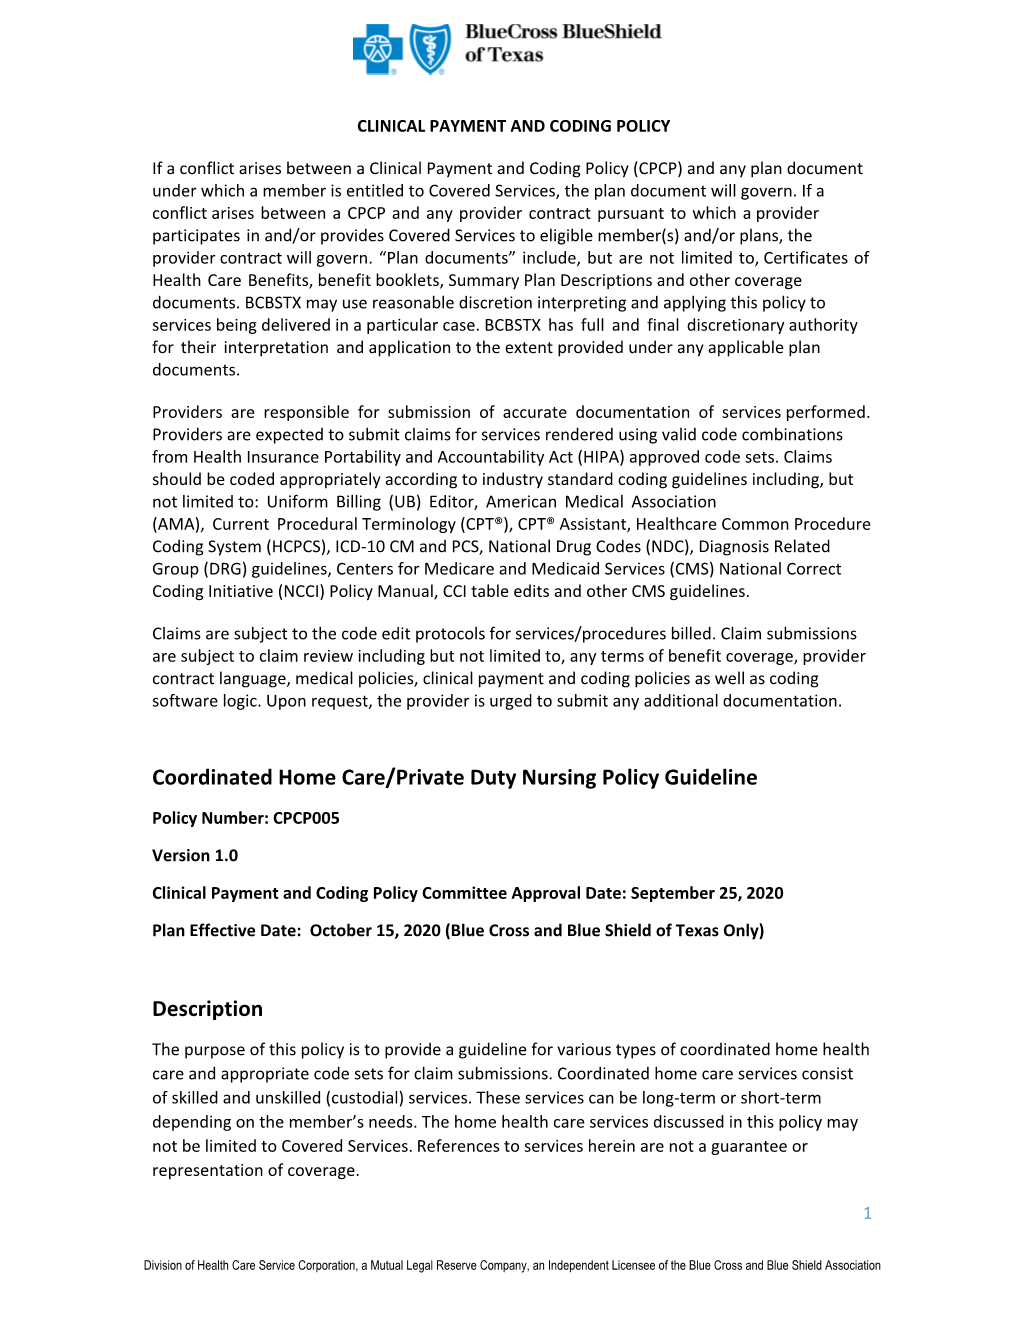 Coordinated Home Care /Private Duty Nursing Policy Guideline